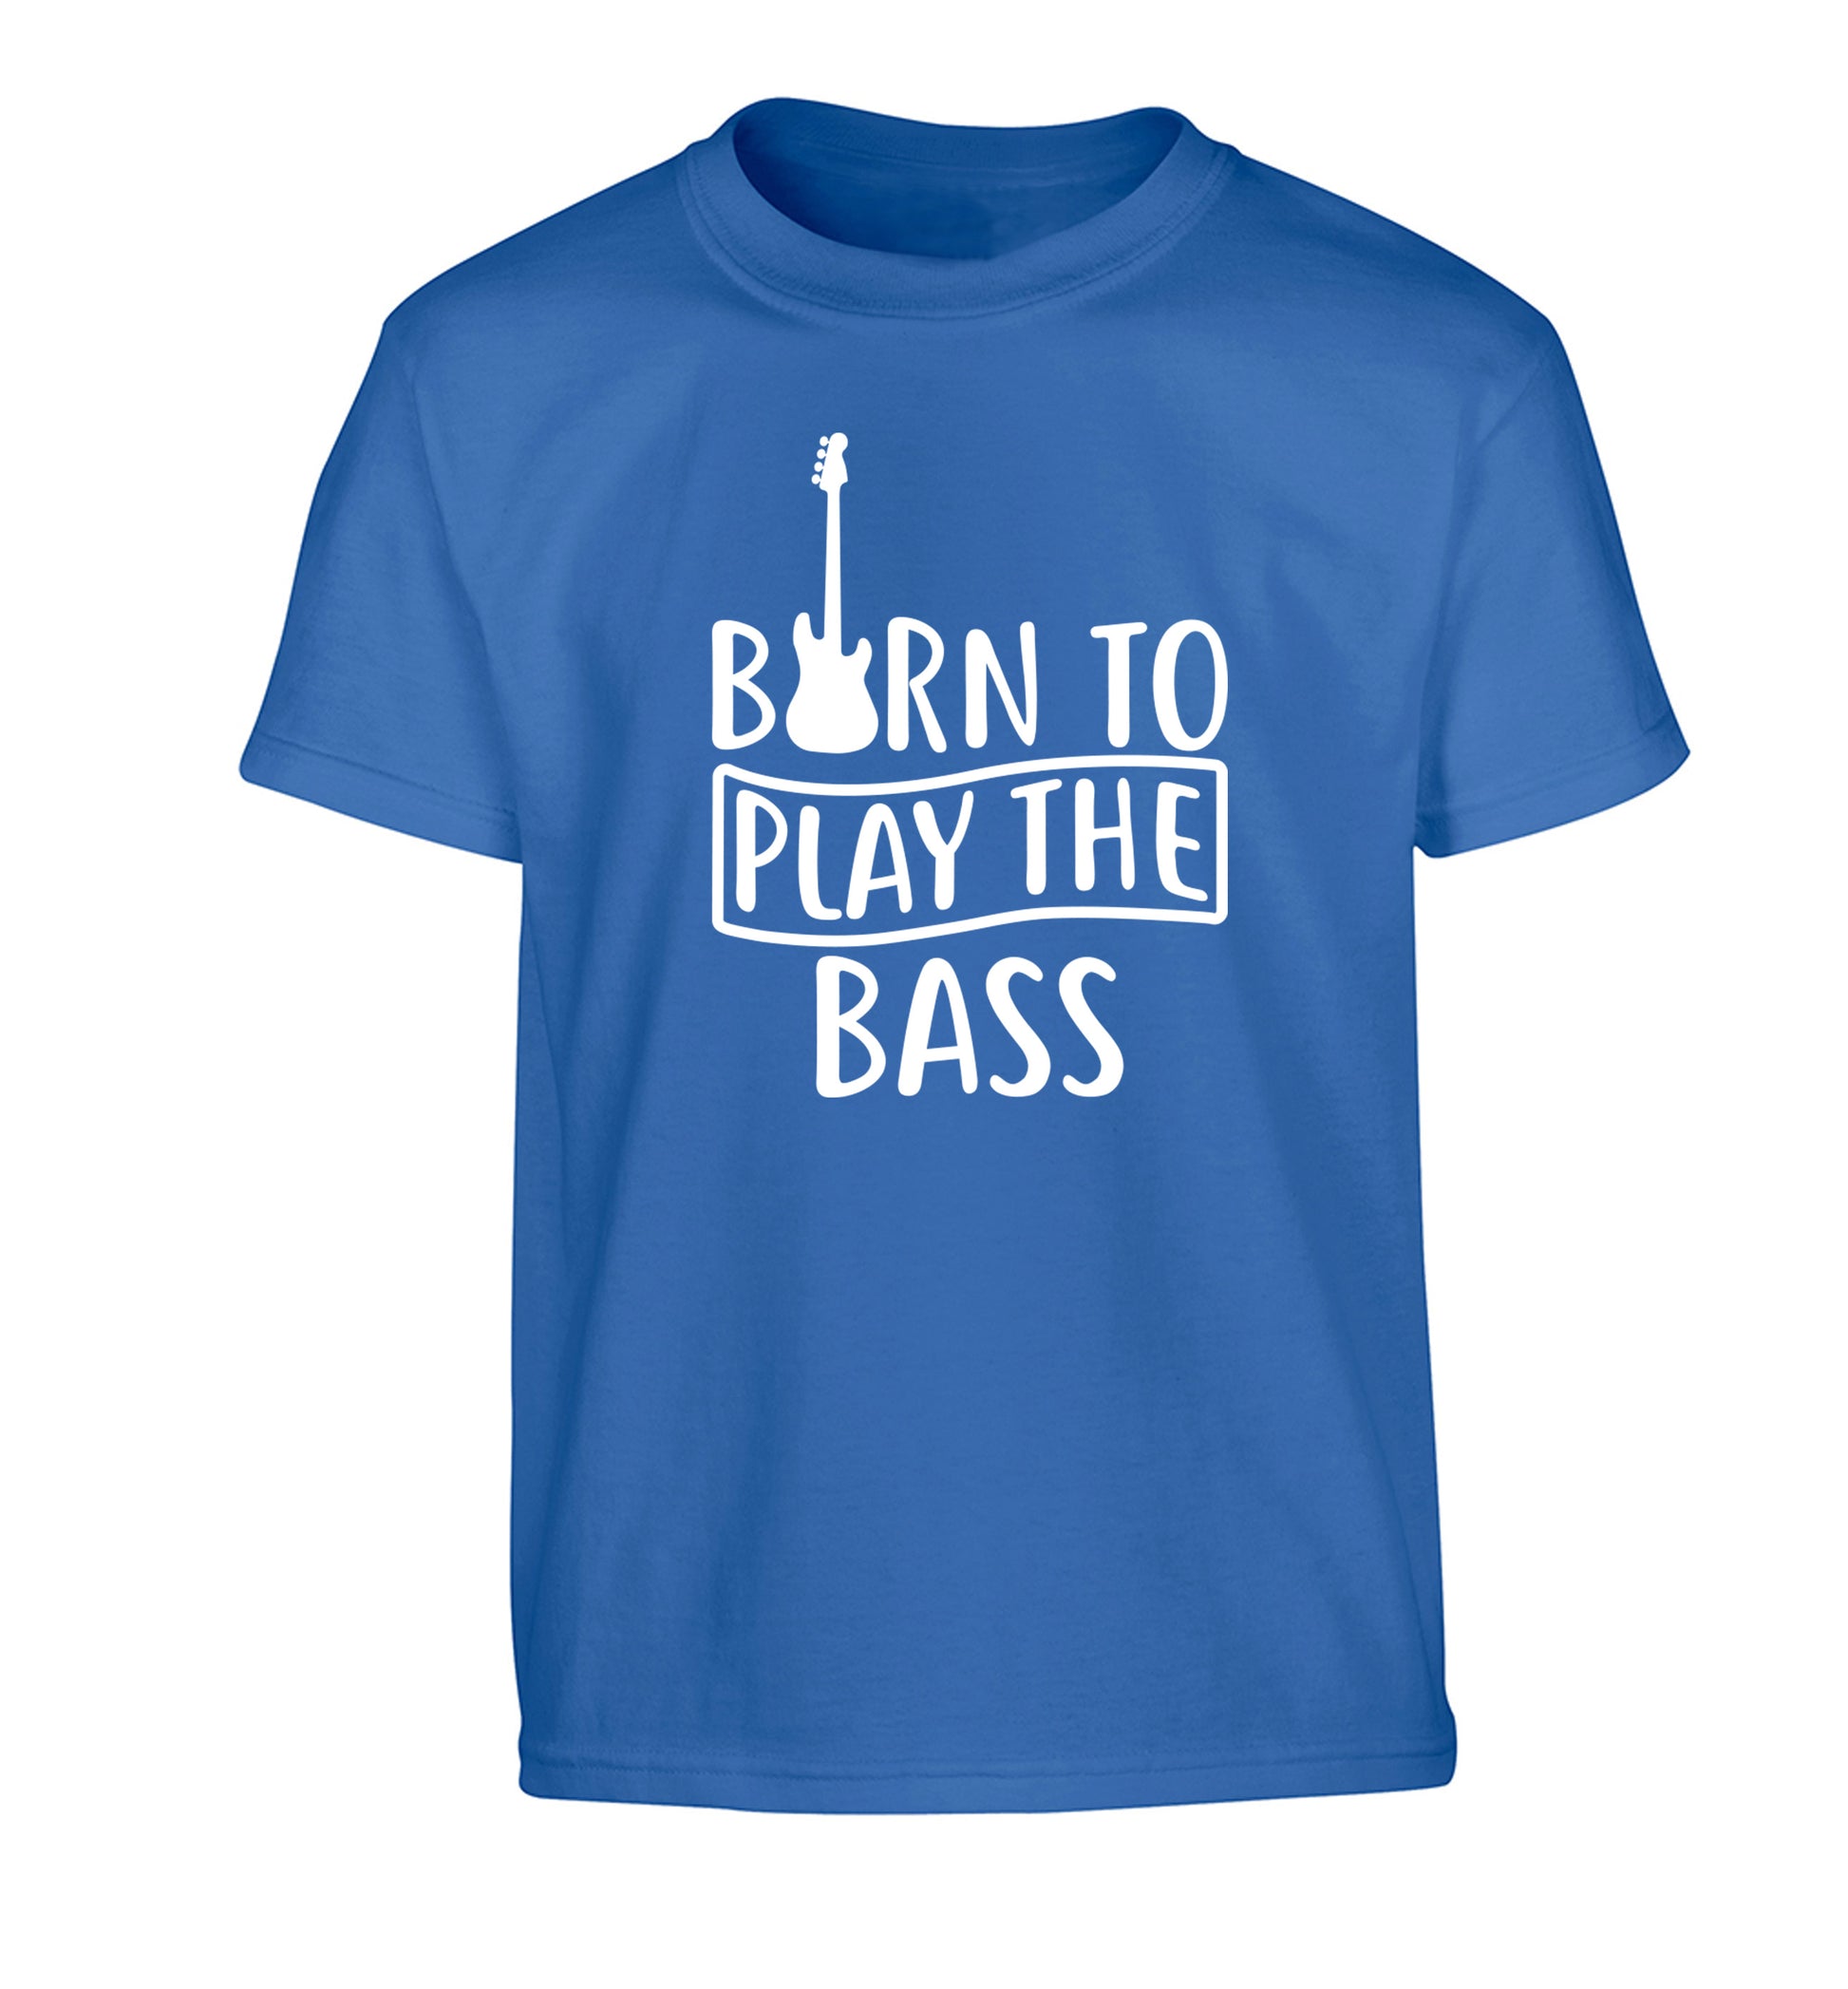 Born to play the bass Children's blue Tshirt 12-14 Years